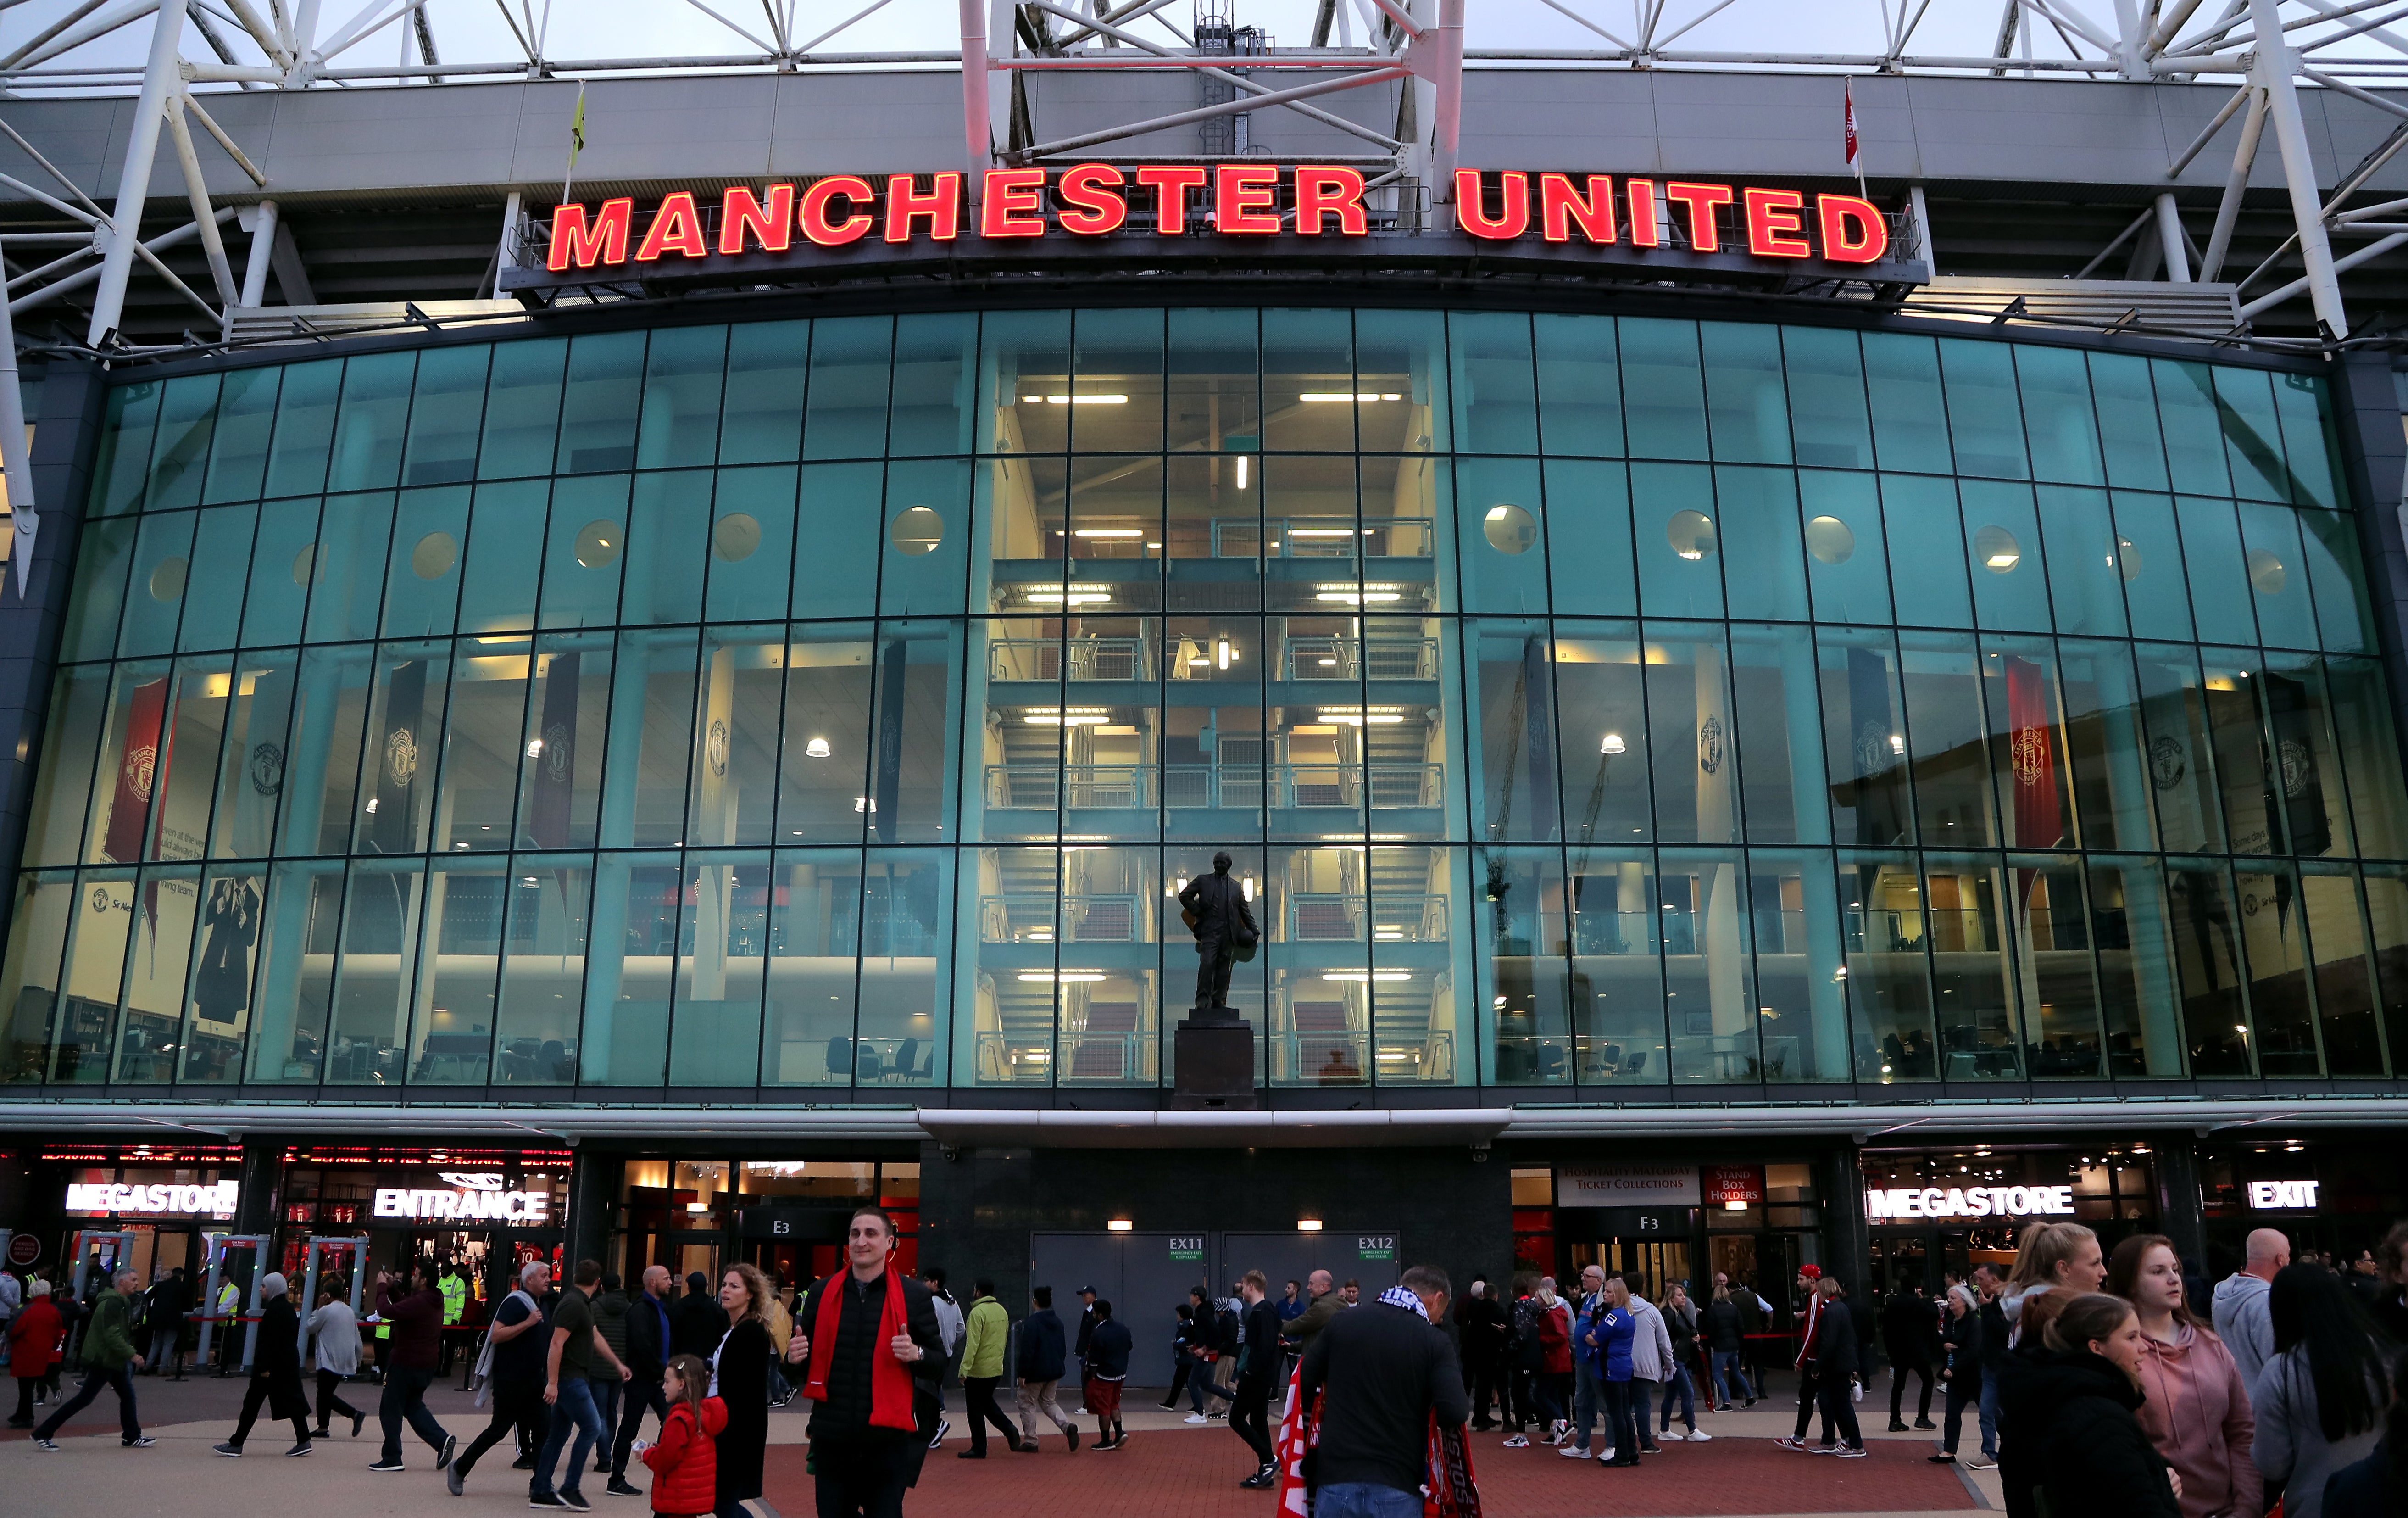 Manchester United were put up for sale in November